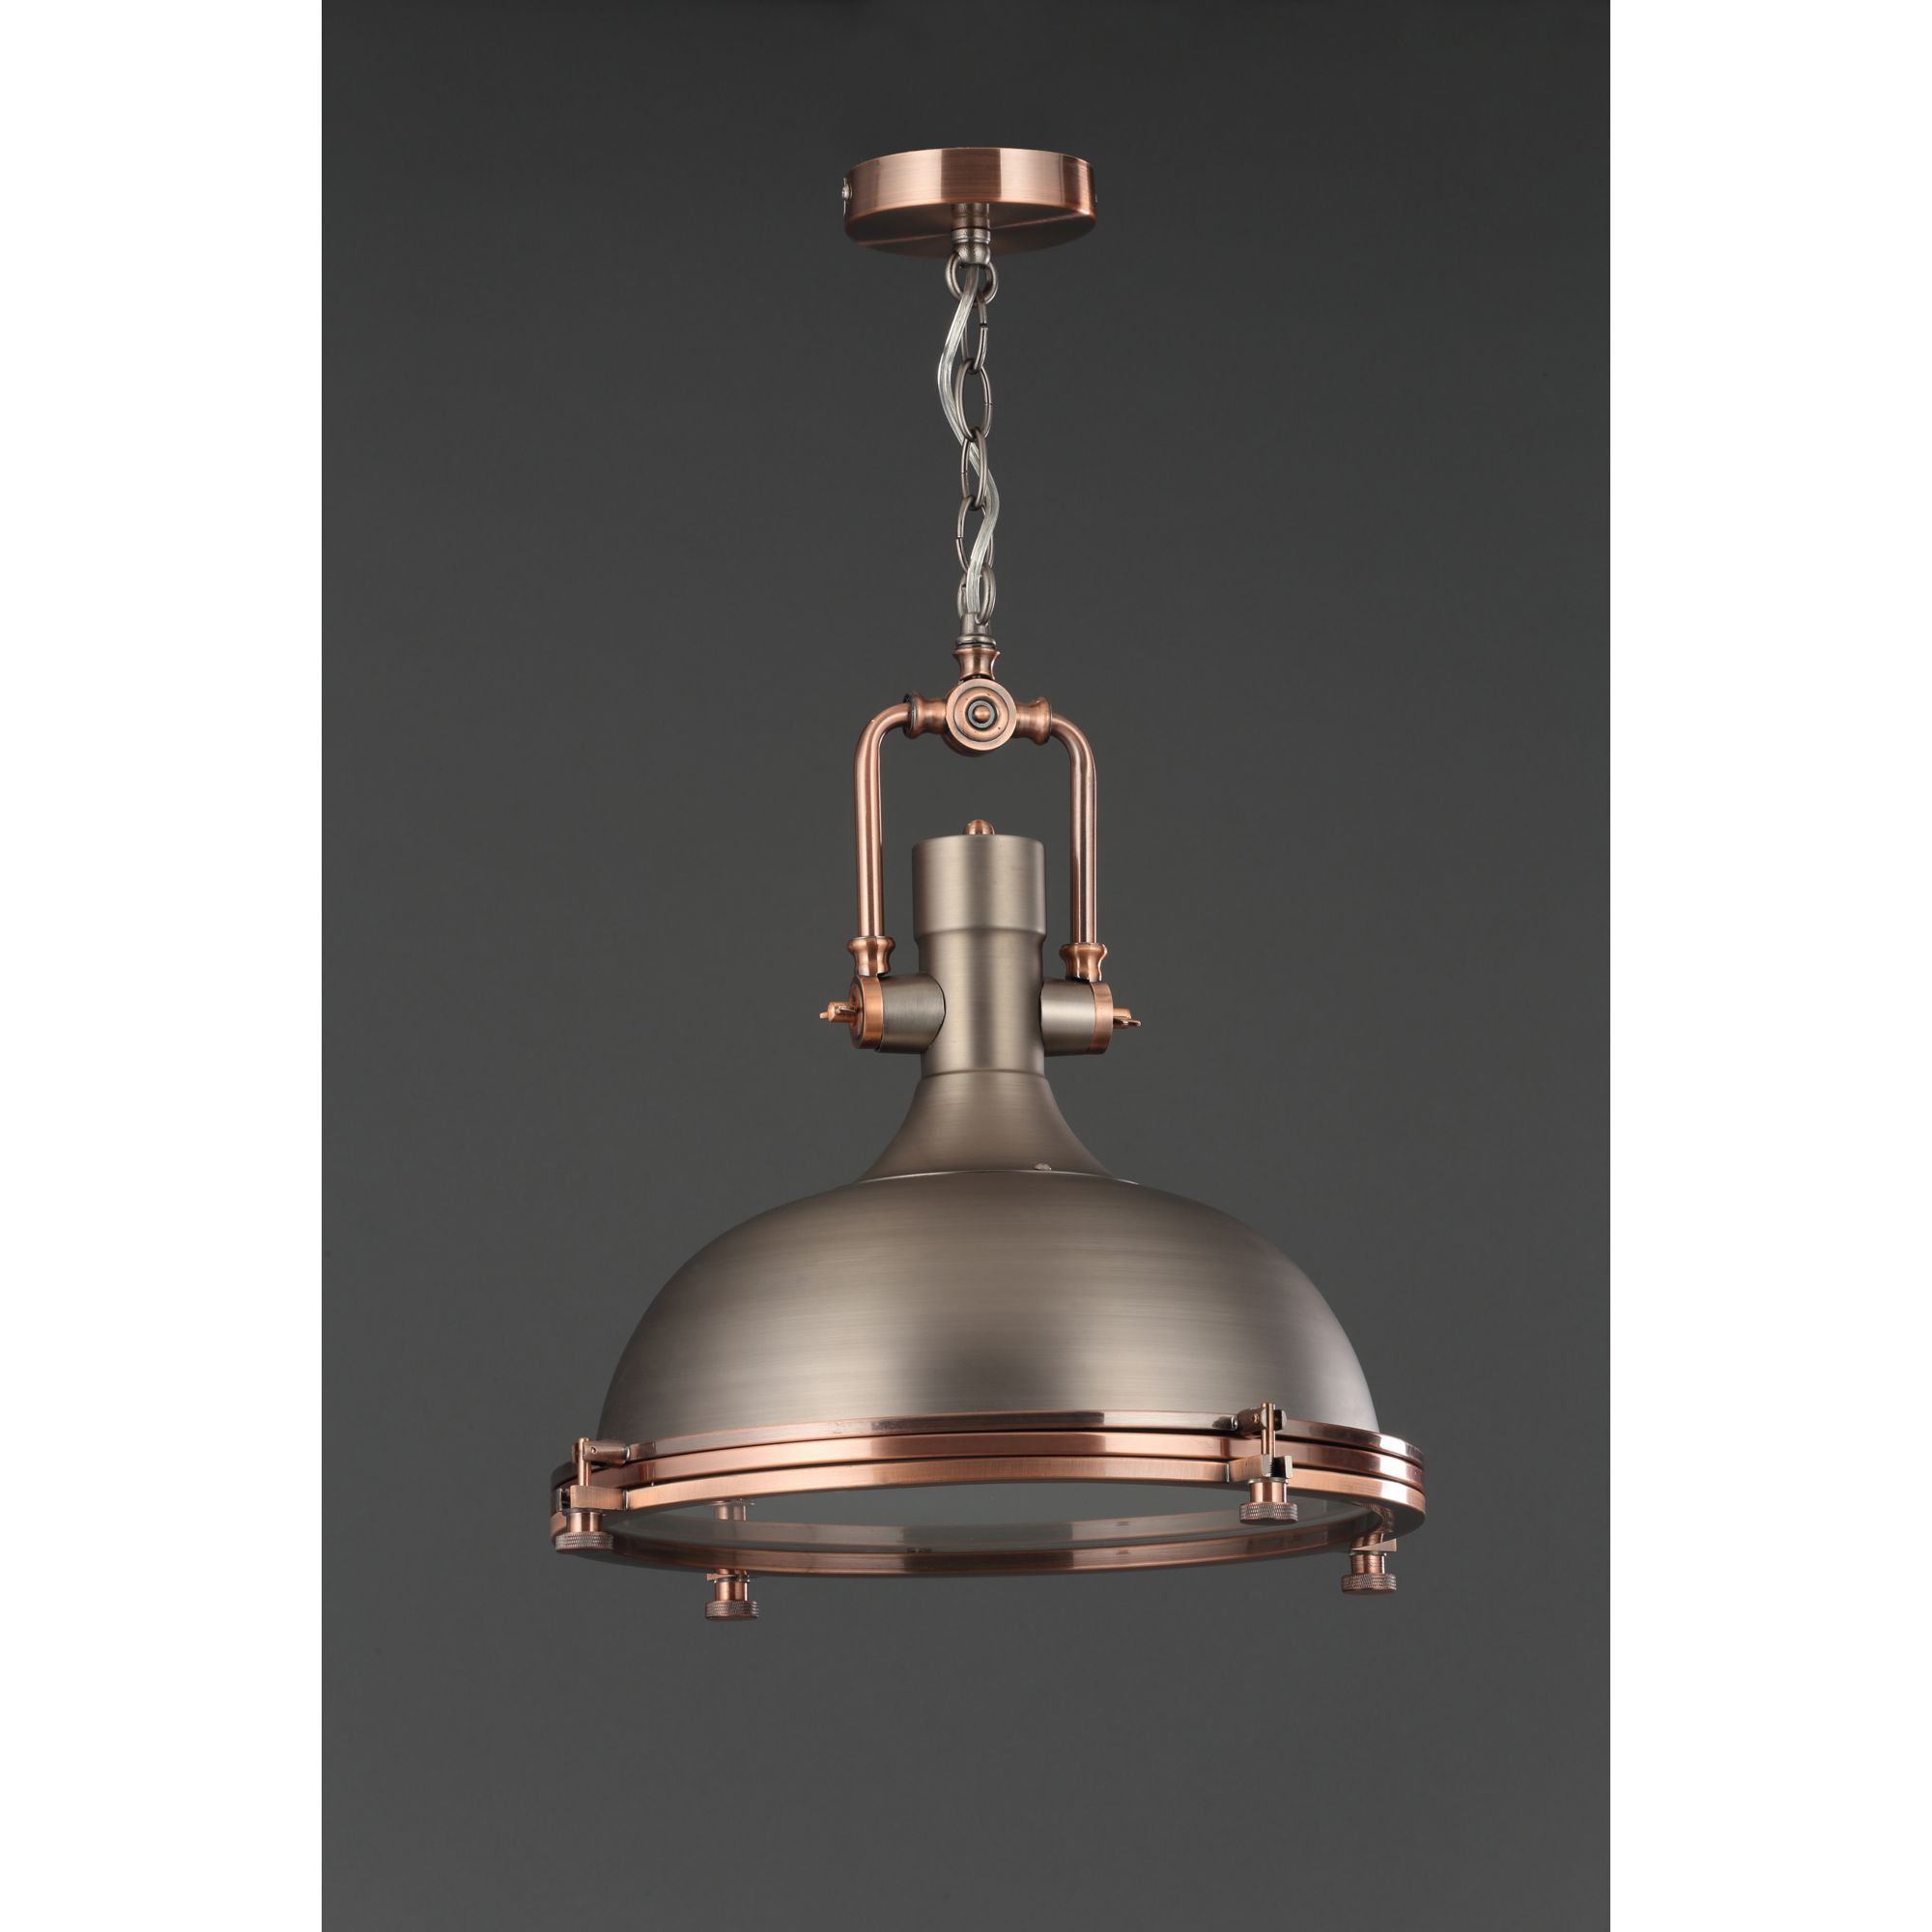 Inlight Charly Pendant Glass & metal Pewter effect Ceiling light